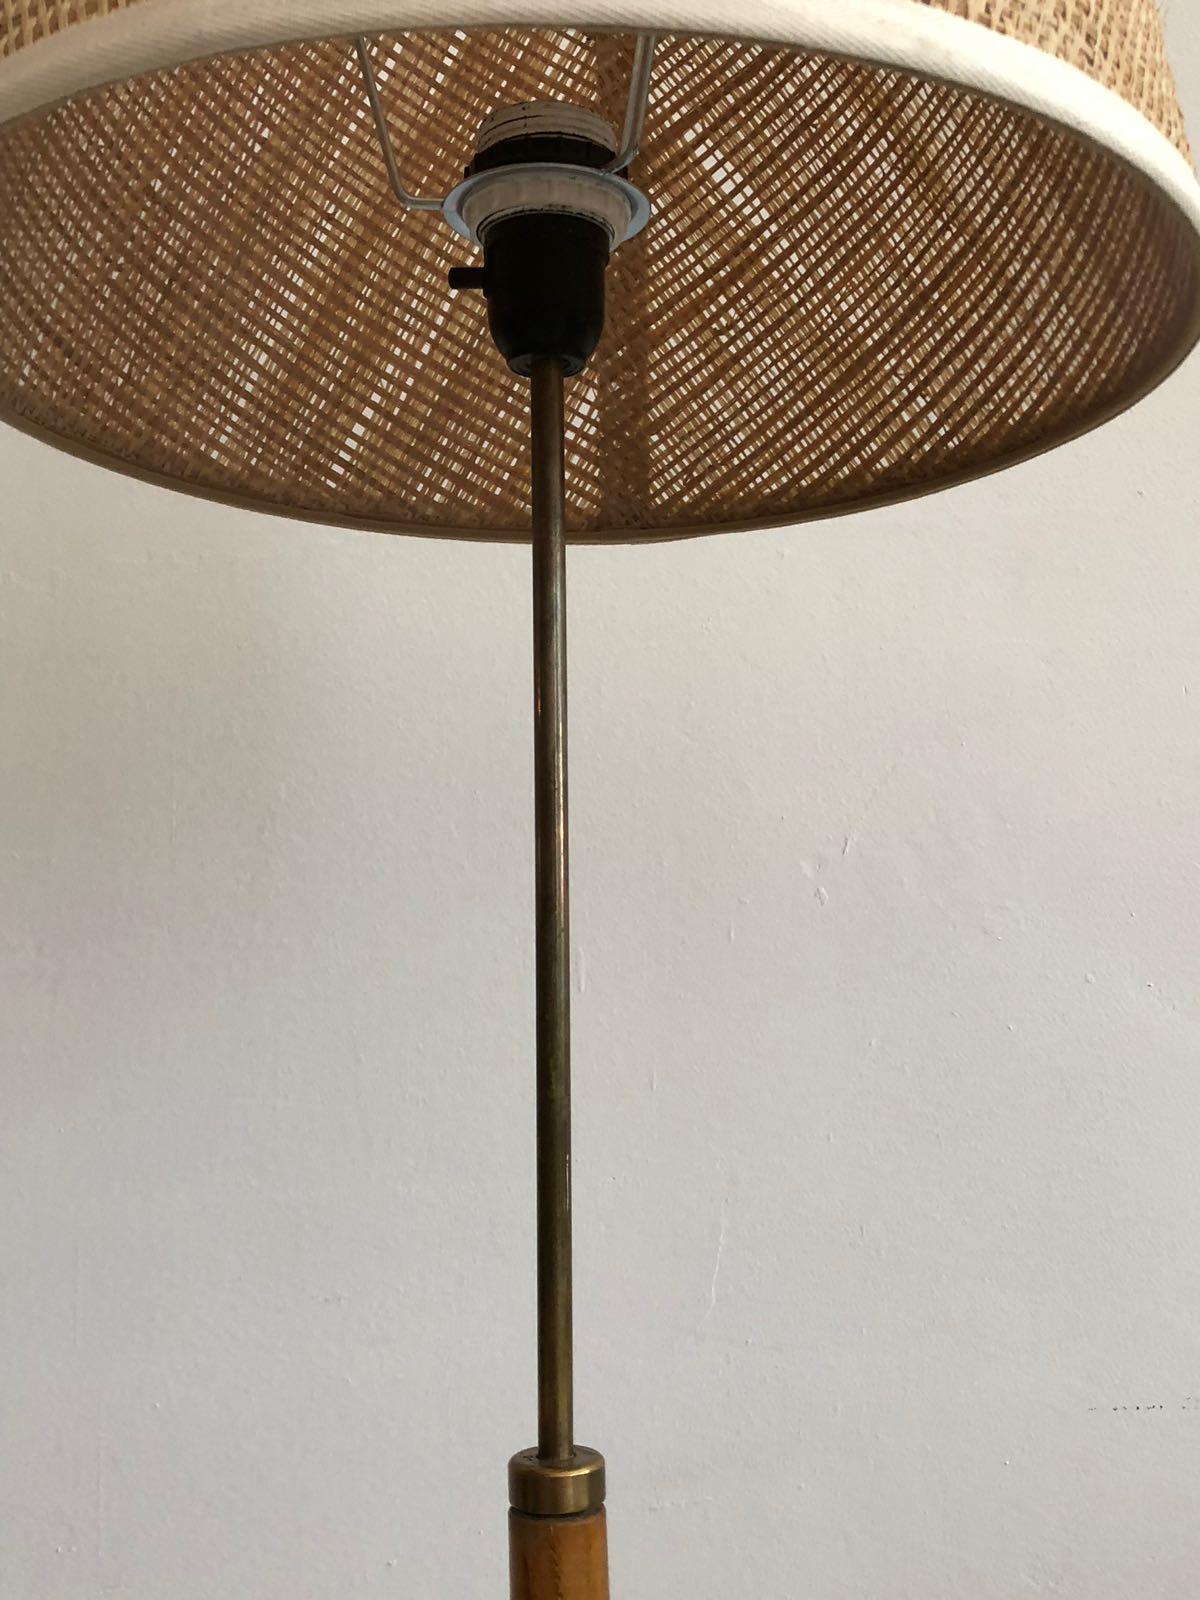 Swedish Scandinavian Modern Floor Lamp with Wooden Stand by Bergboms